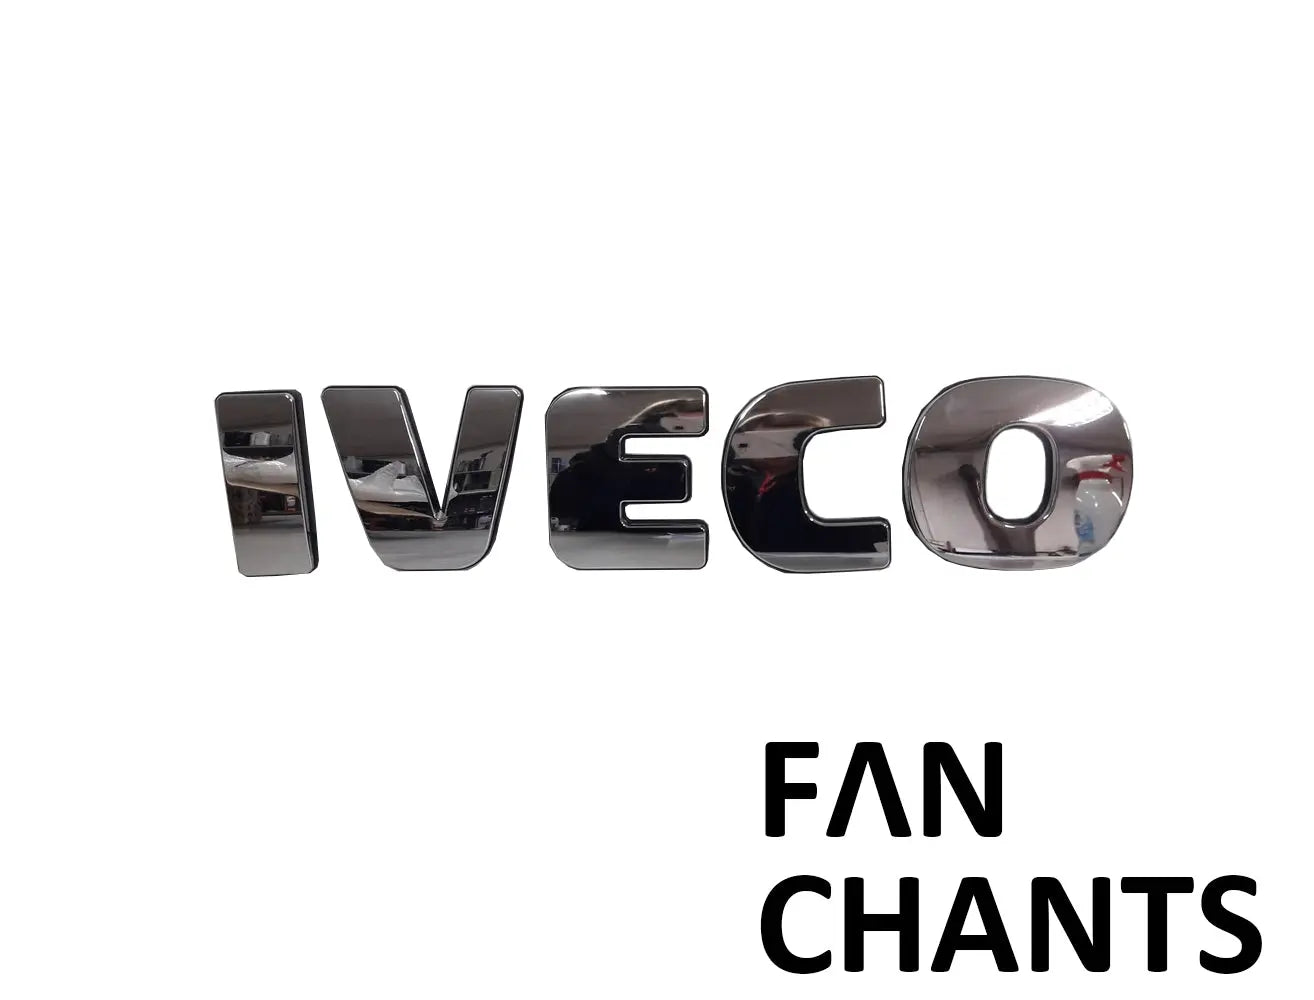 CHINA Factory Wholesale 8101417479 MARK EMBLEM for IVECO Daily III Bus FANCHANTS China Auto Parts Wholesales